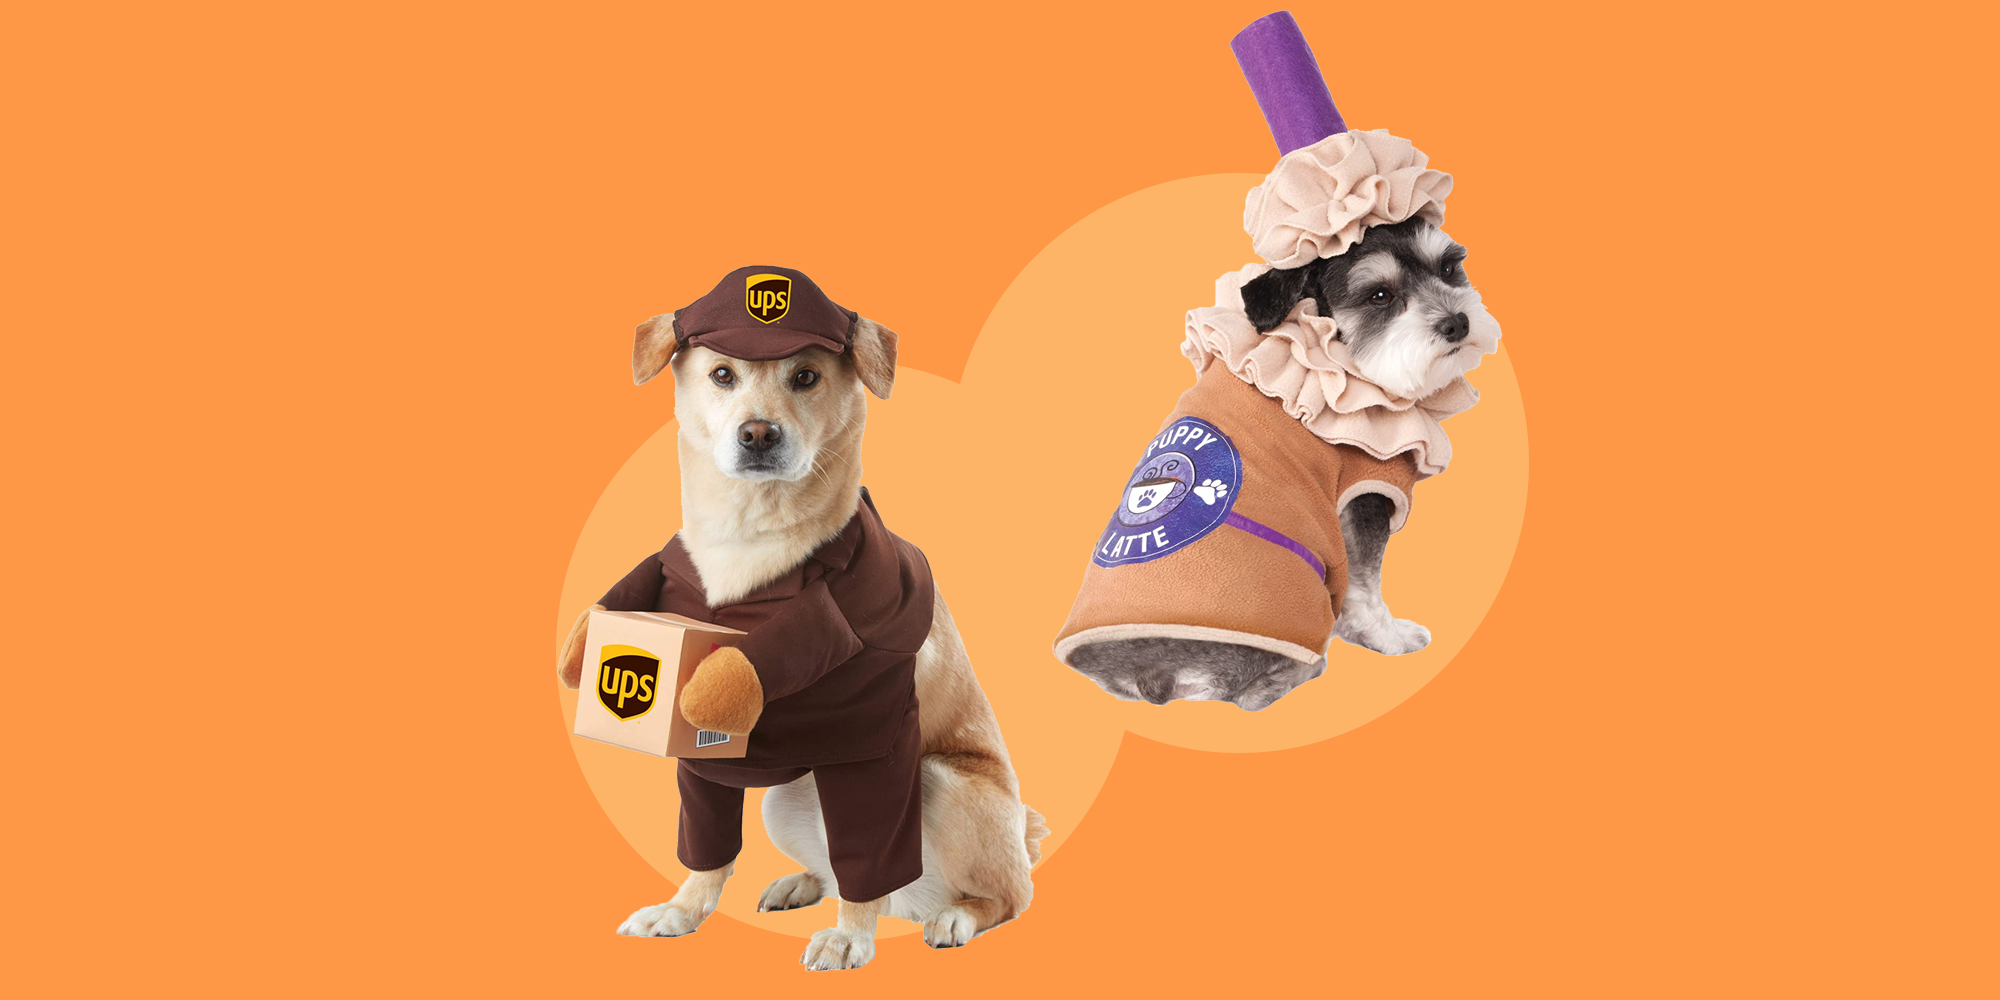 35 Best Dog Costumes For Halloween 2020 Cute Funny Halloween Costume Ideas For Puppies